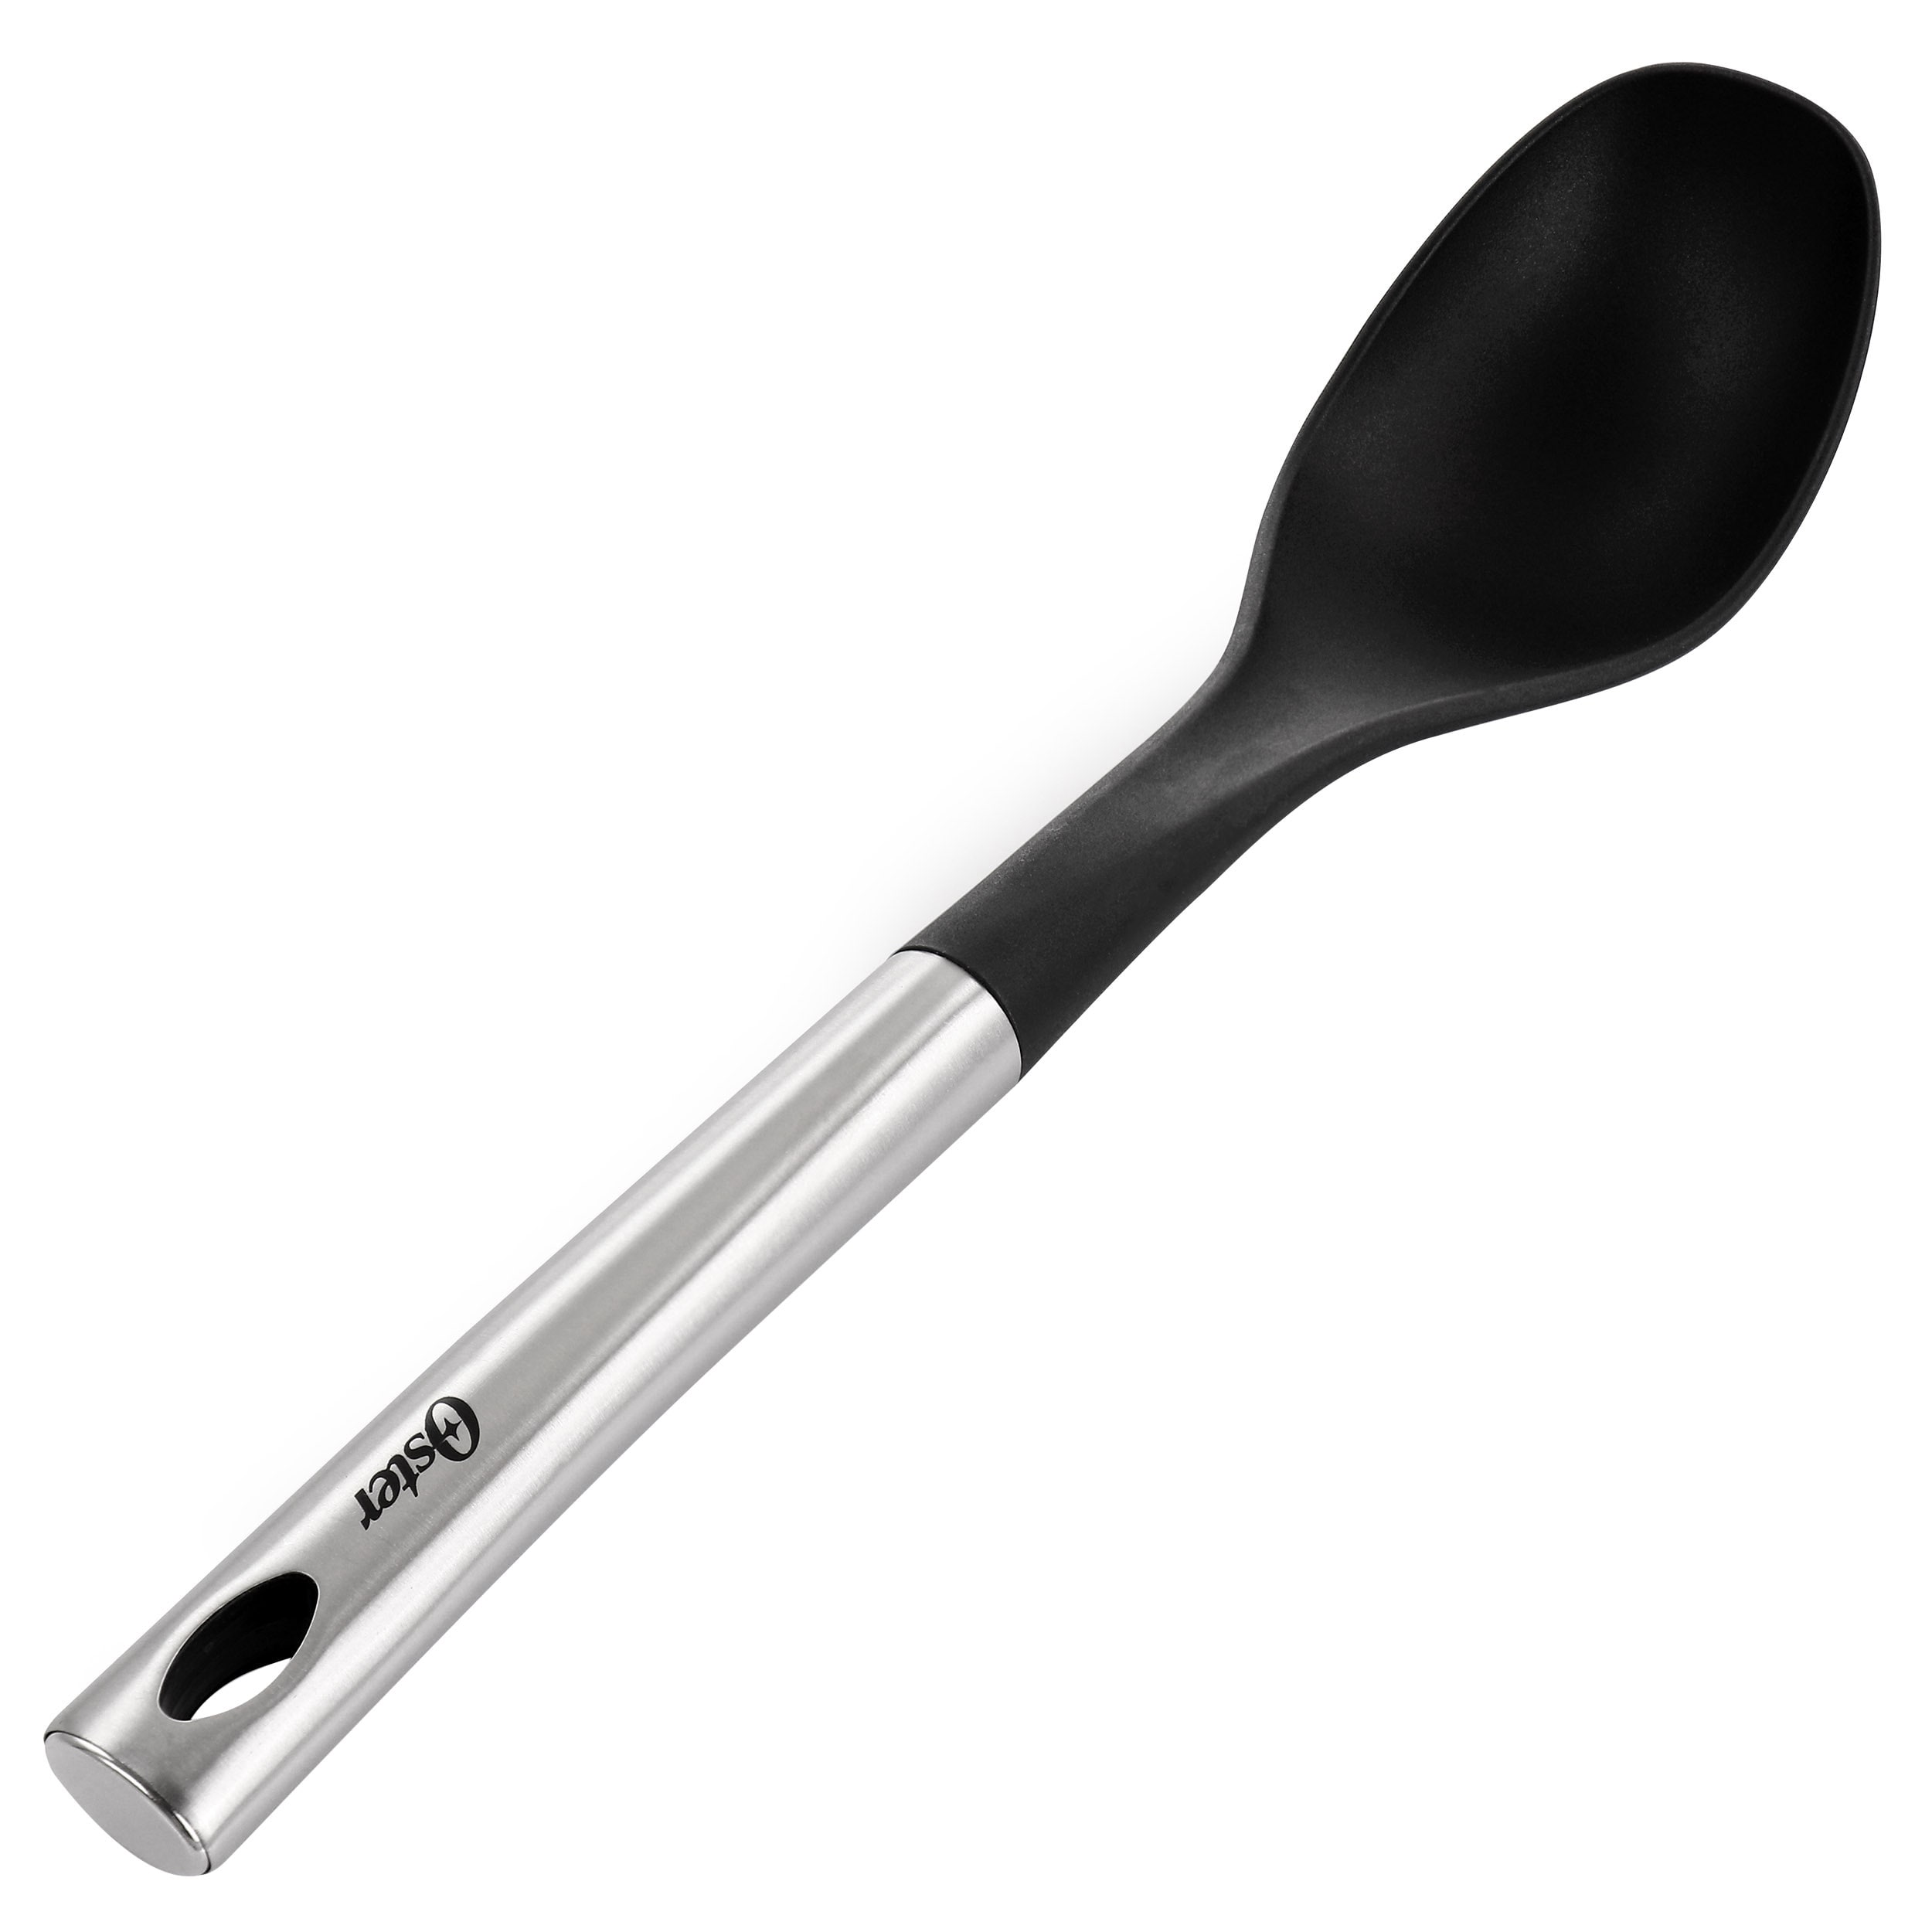 https://ak1.ostkcdn.com/images/products/is/images/direct/b4491348636df72dcfbf049cd52fb709156e249e/Oster-Baldwyn-Stainless-Steel-and-Nylon-Solid-Spoon.jpg